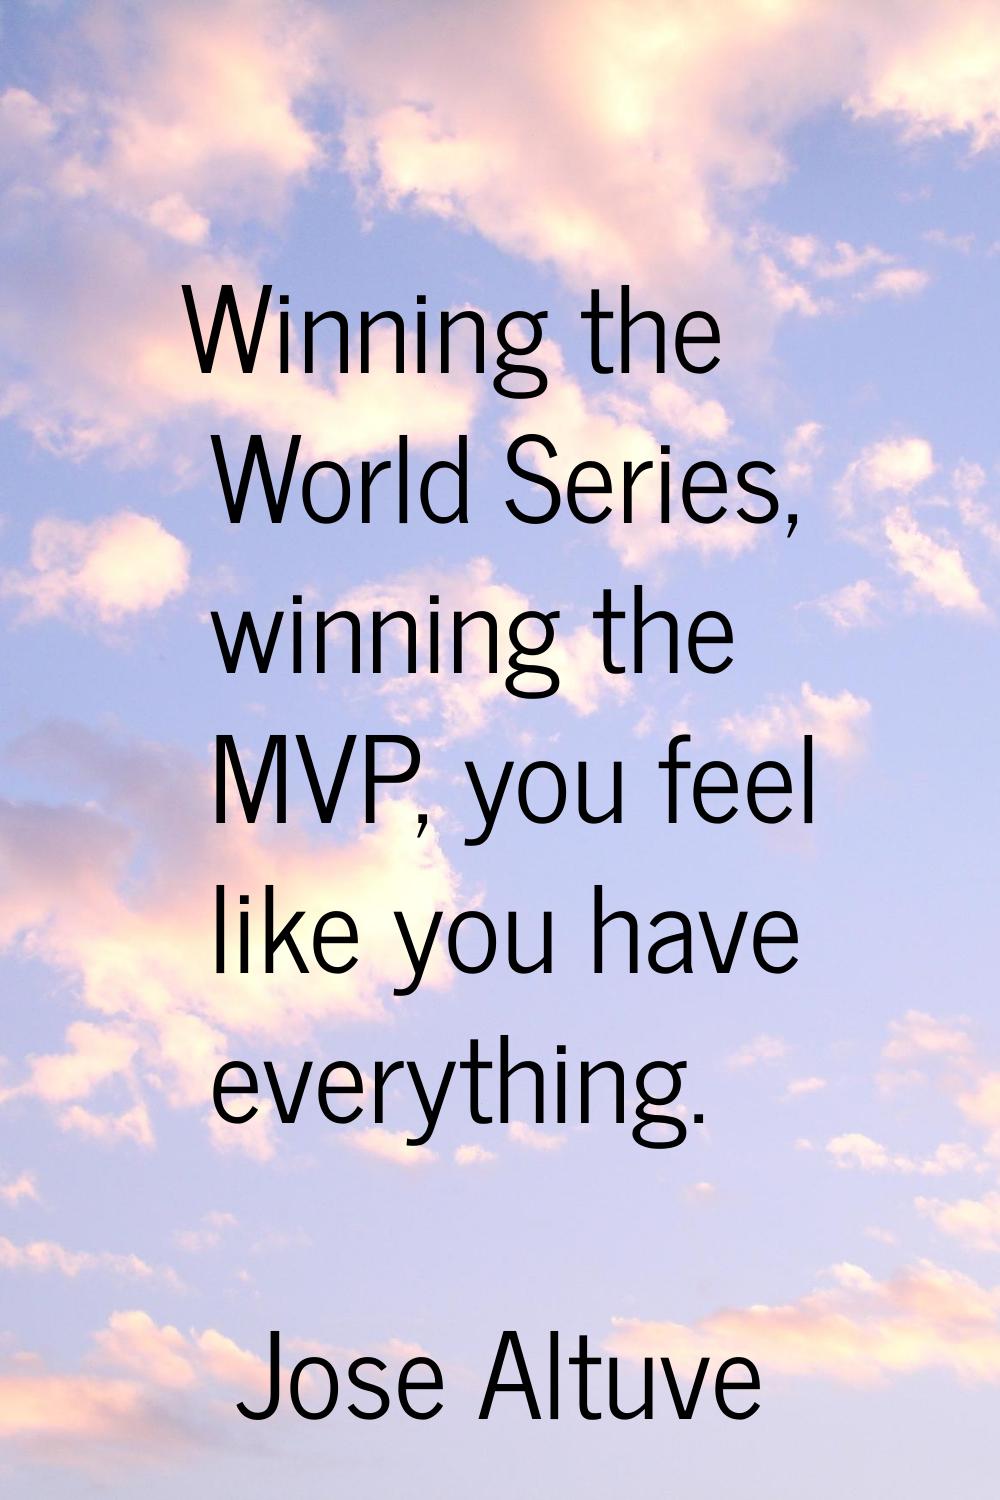 Winning the World Series, winning the MVP, you feel like you have everything.